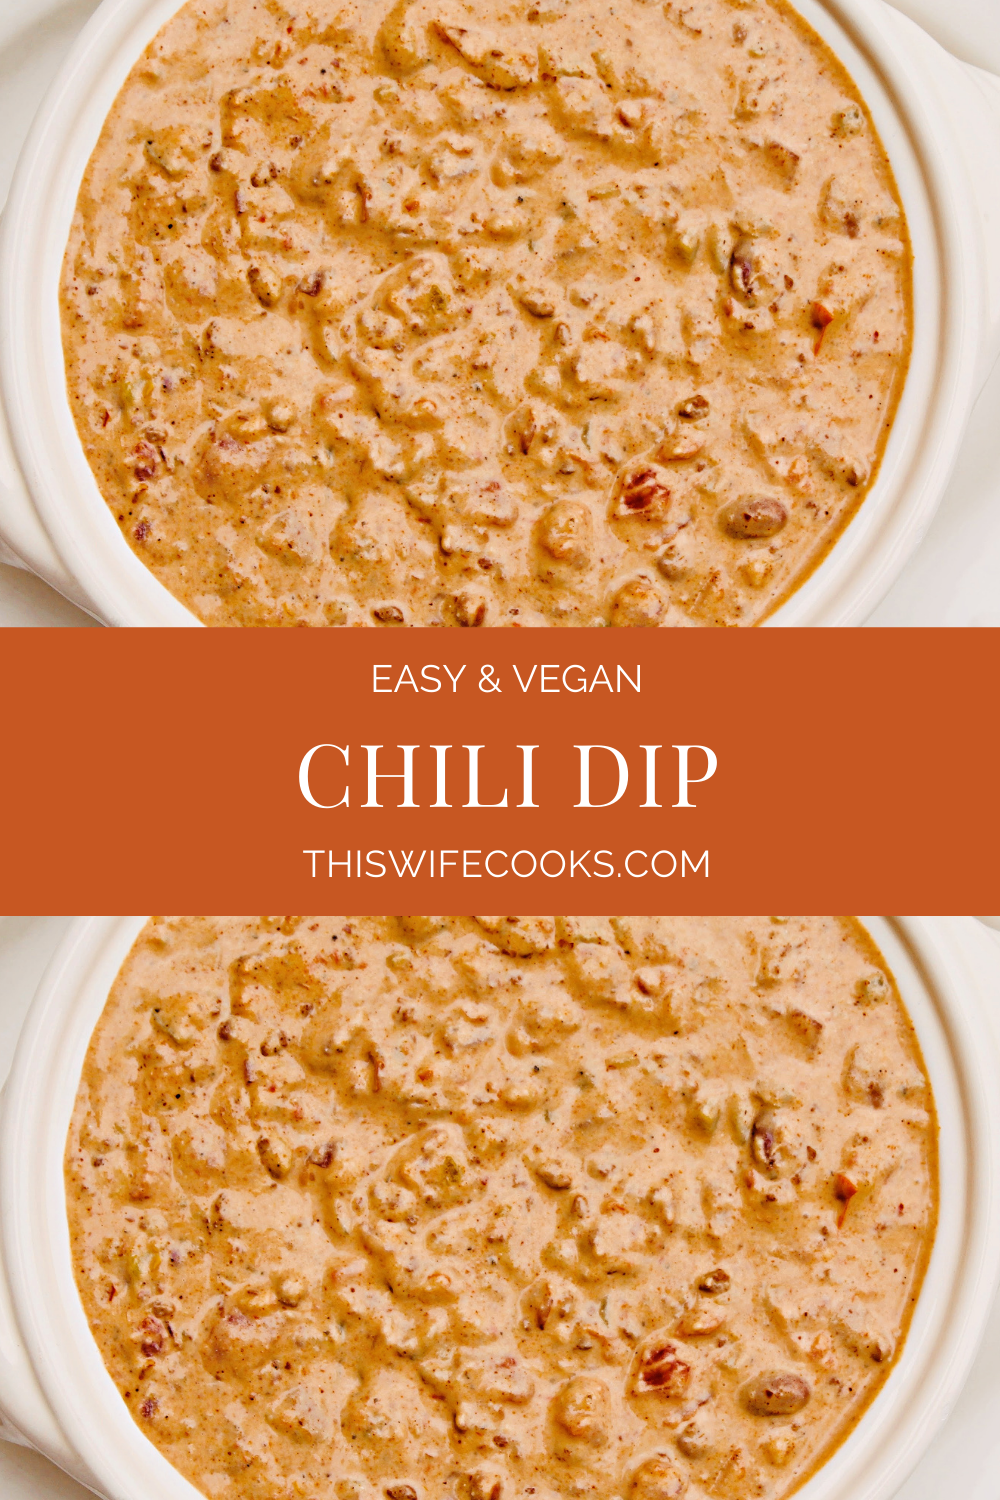 Chili Dip ~ Need a quick and easy game day or movie night snack? This crowd-pleasing dip is ready to serve in 10 minutes or less! via @thiswifecooks